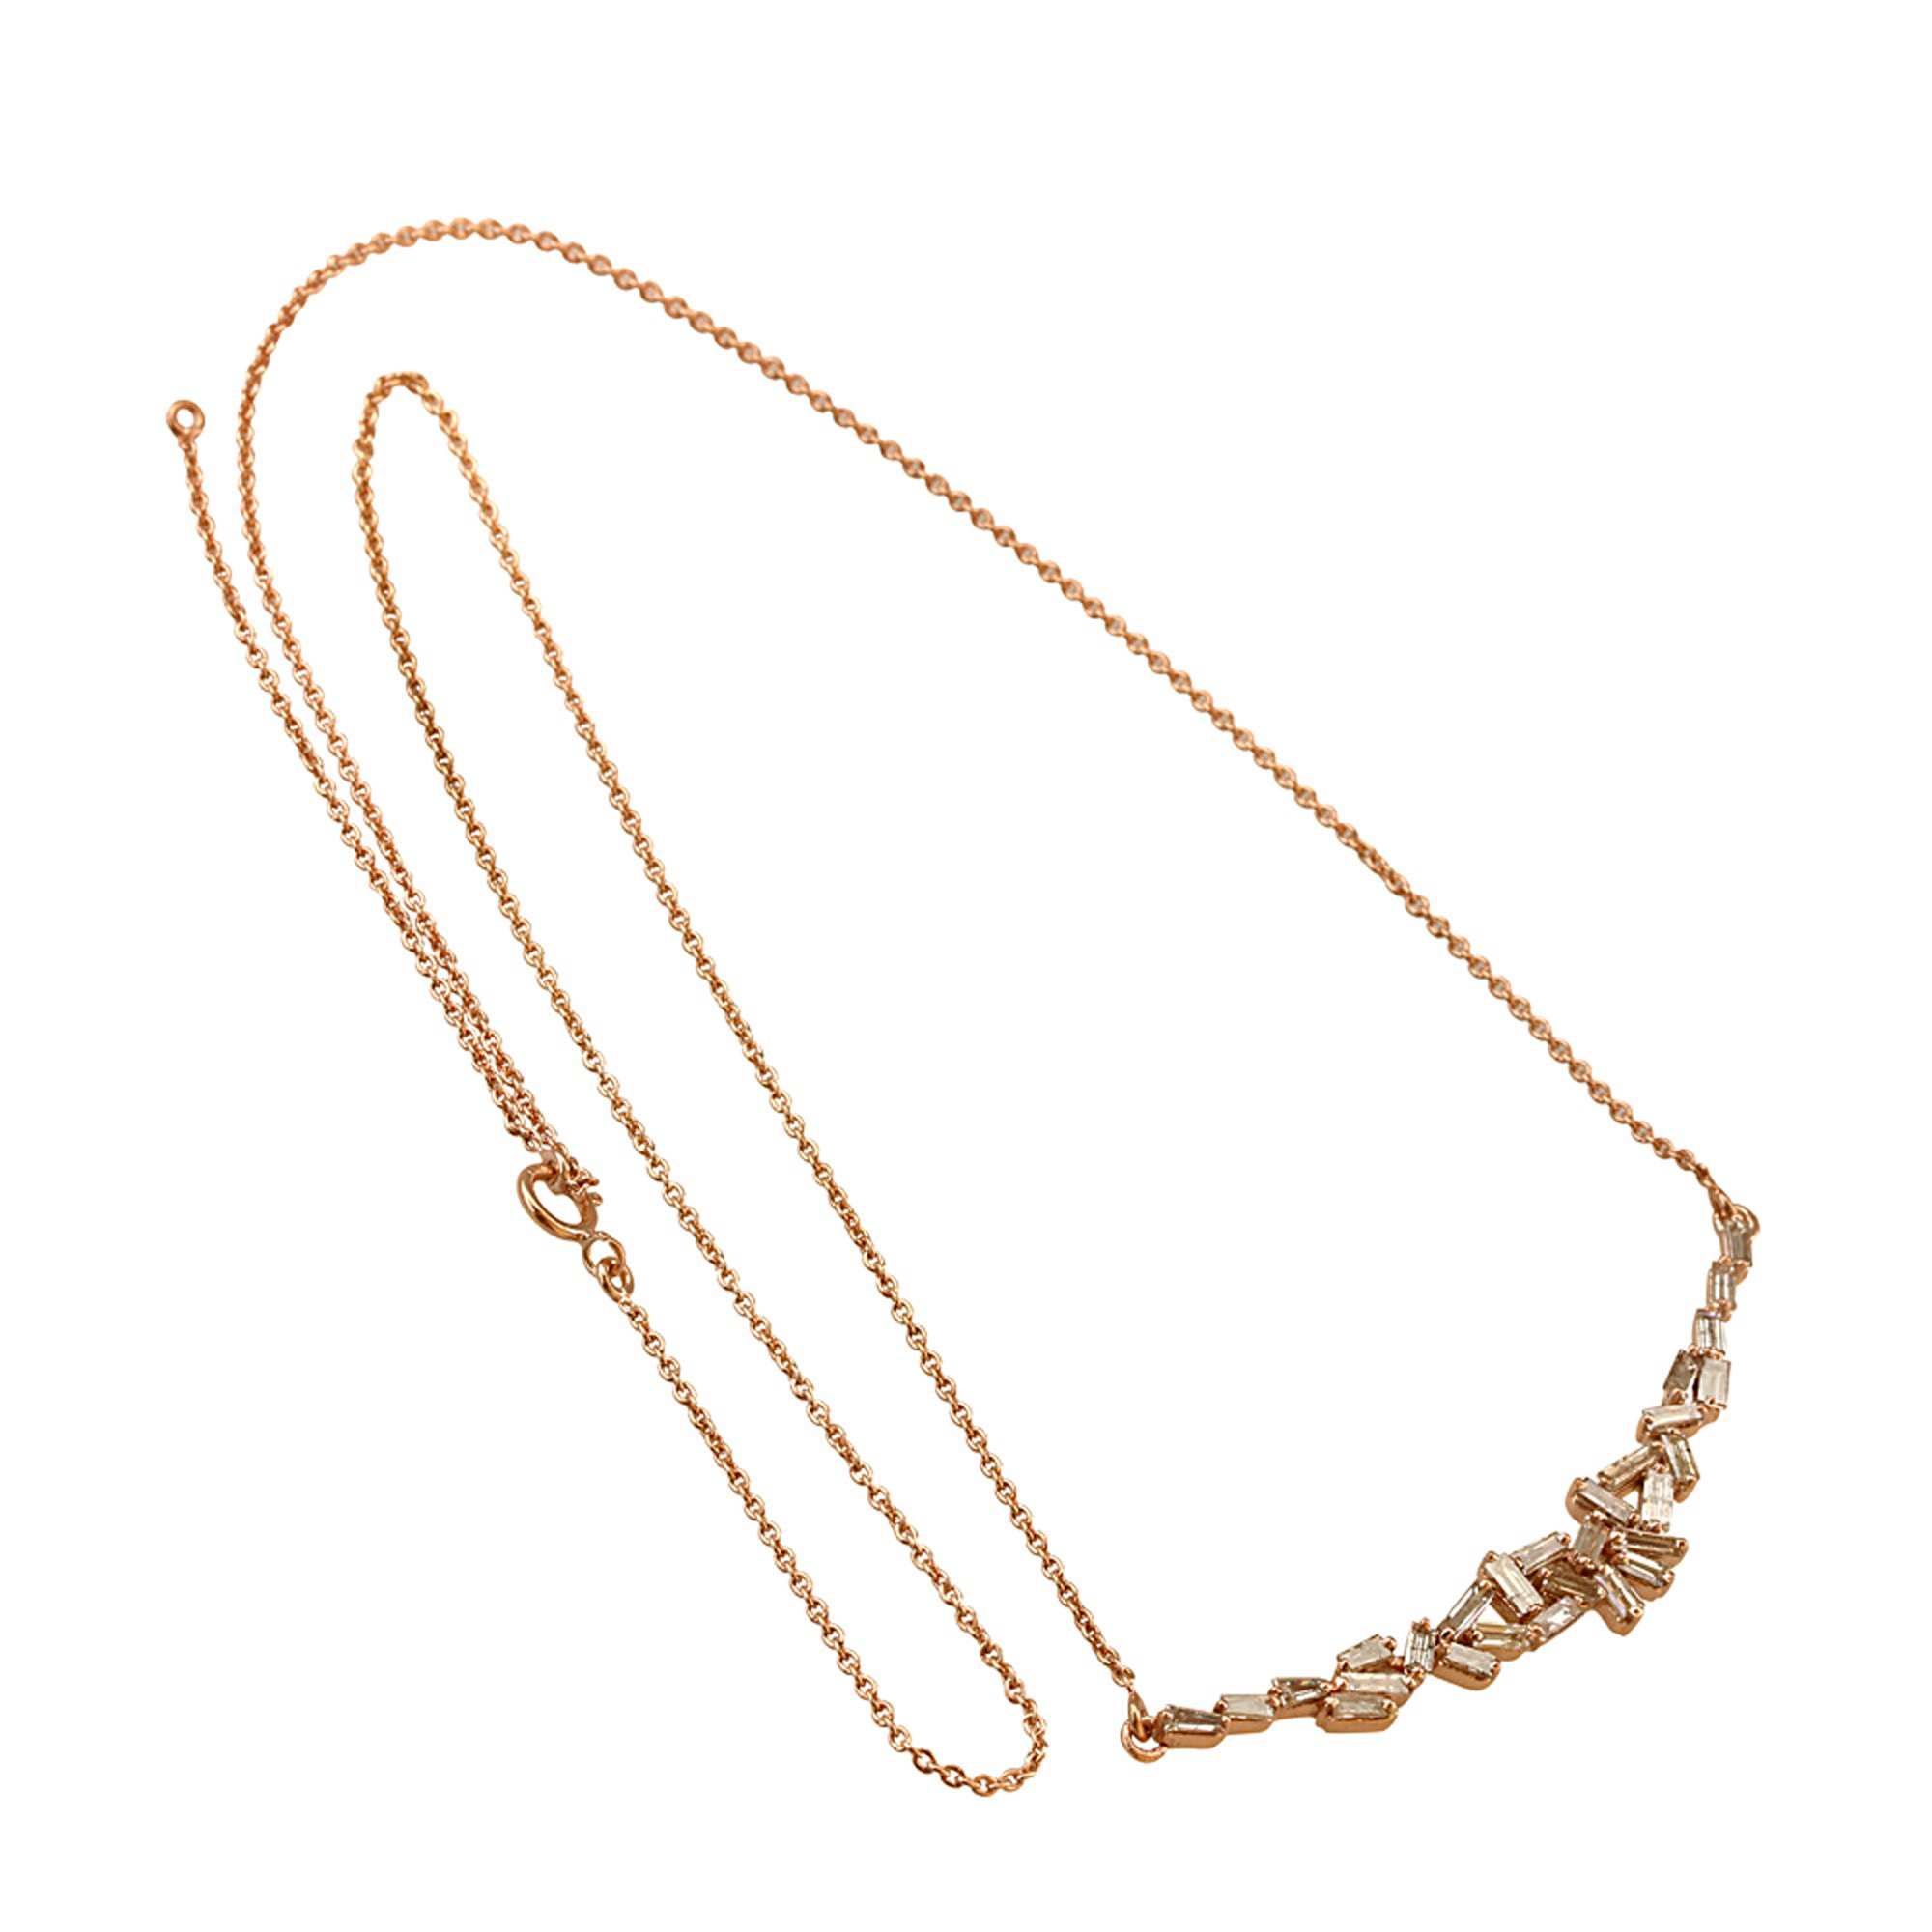 18k Solid gold chain jewelry, Real diamond baguette necklace